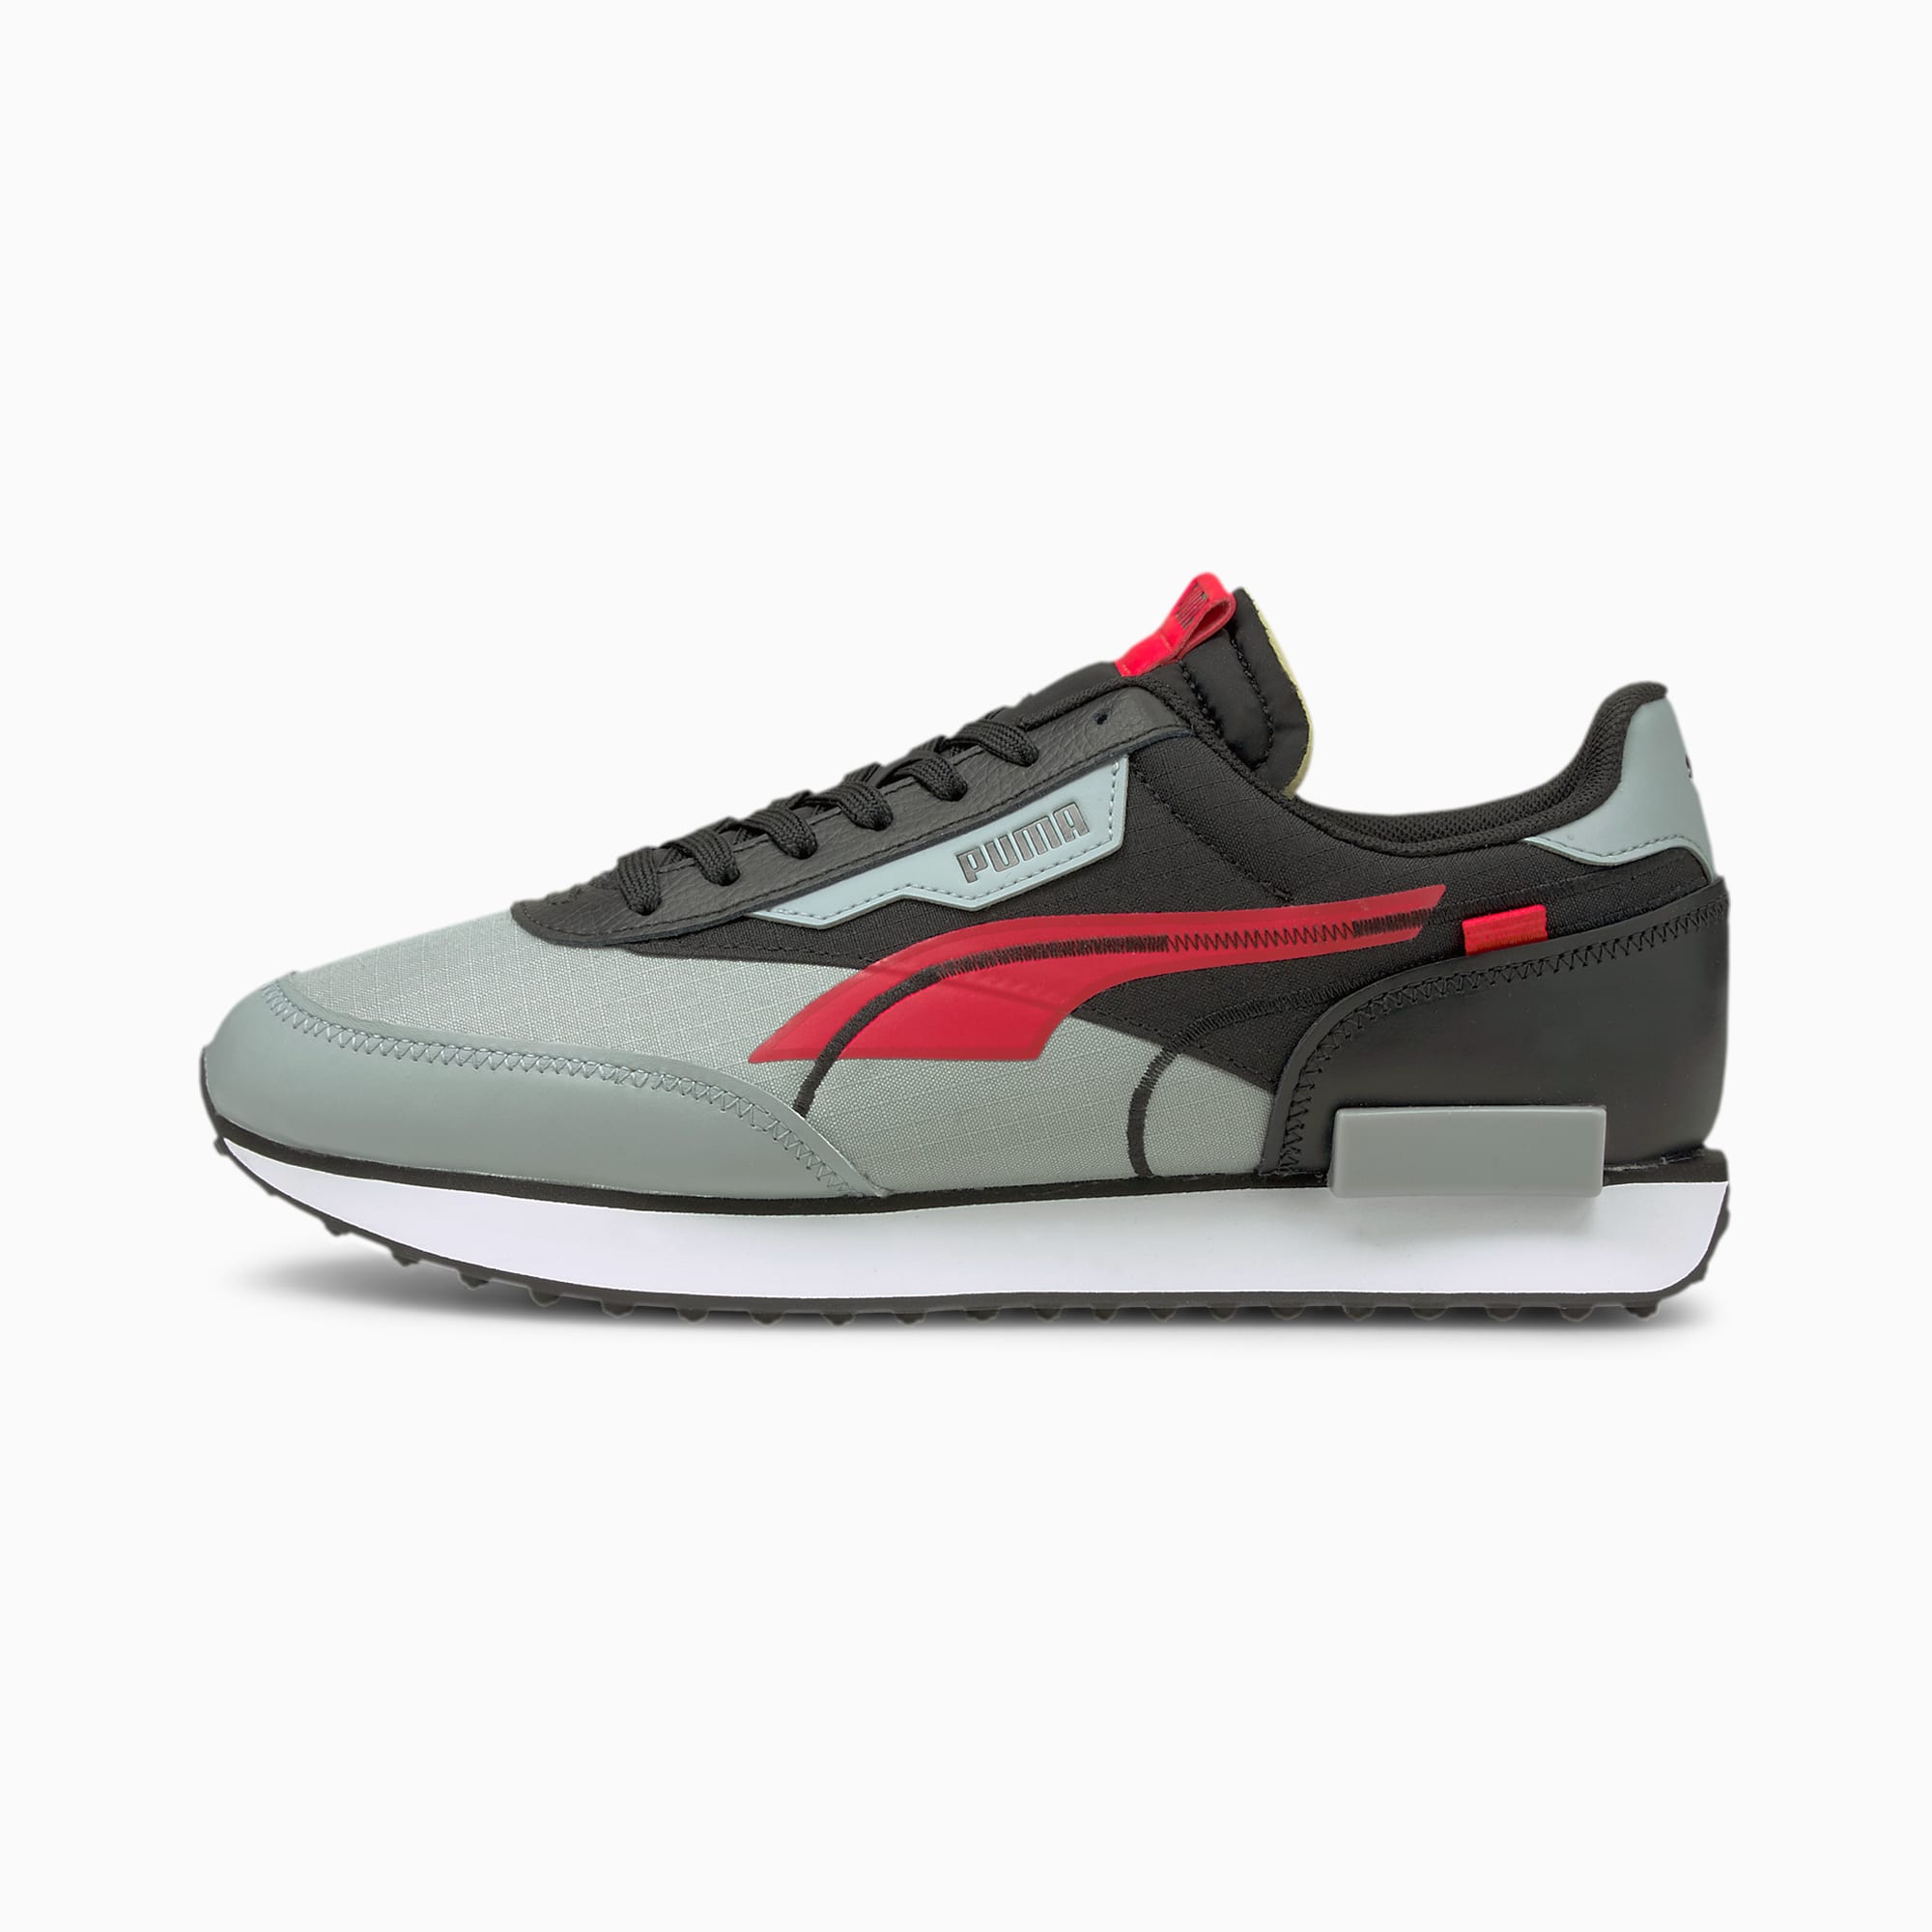 Future Rider Twofold Sneakers Red Black Size 37 5 Puma Puma Stylesearch